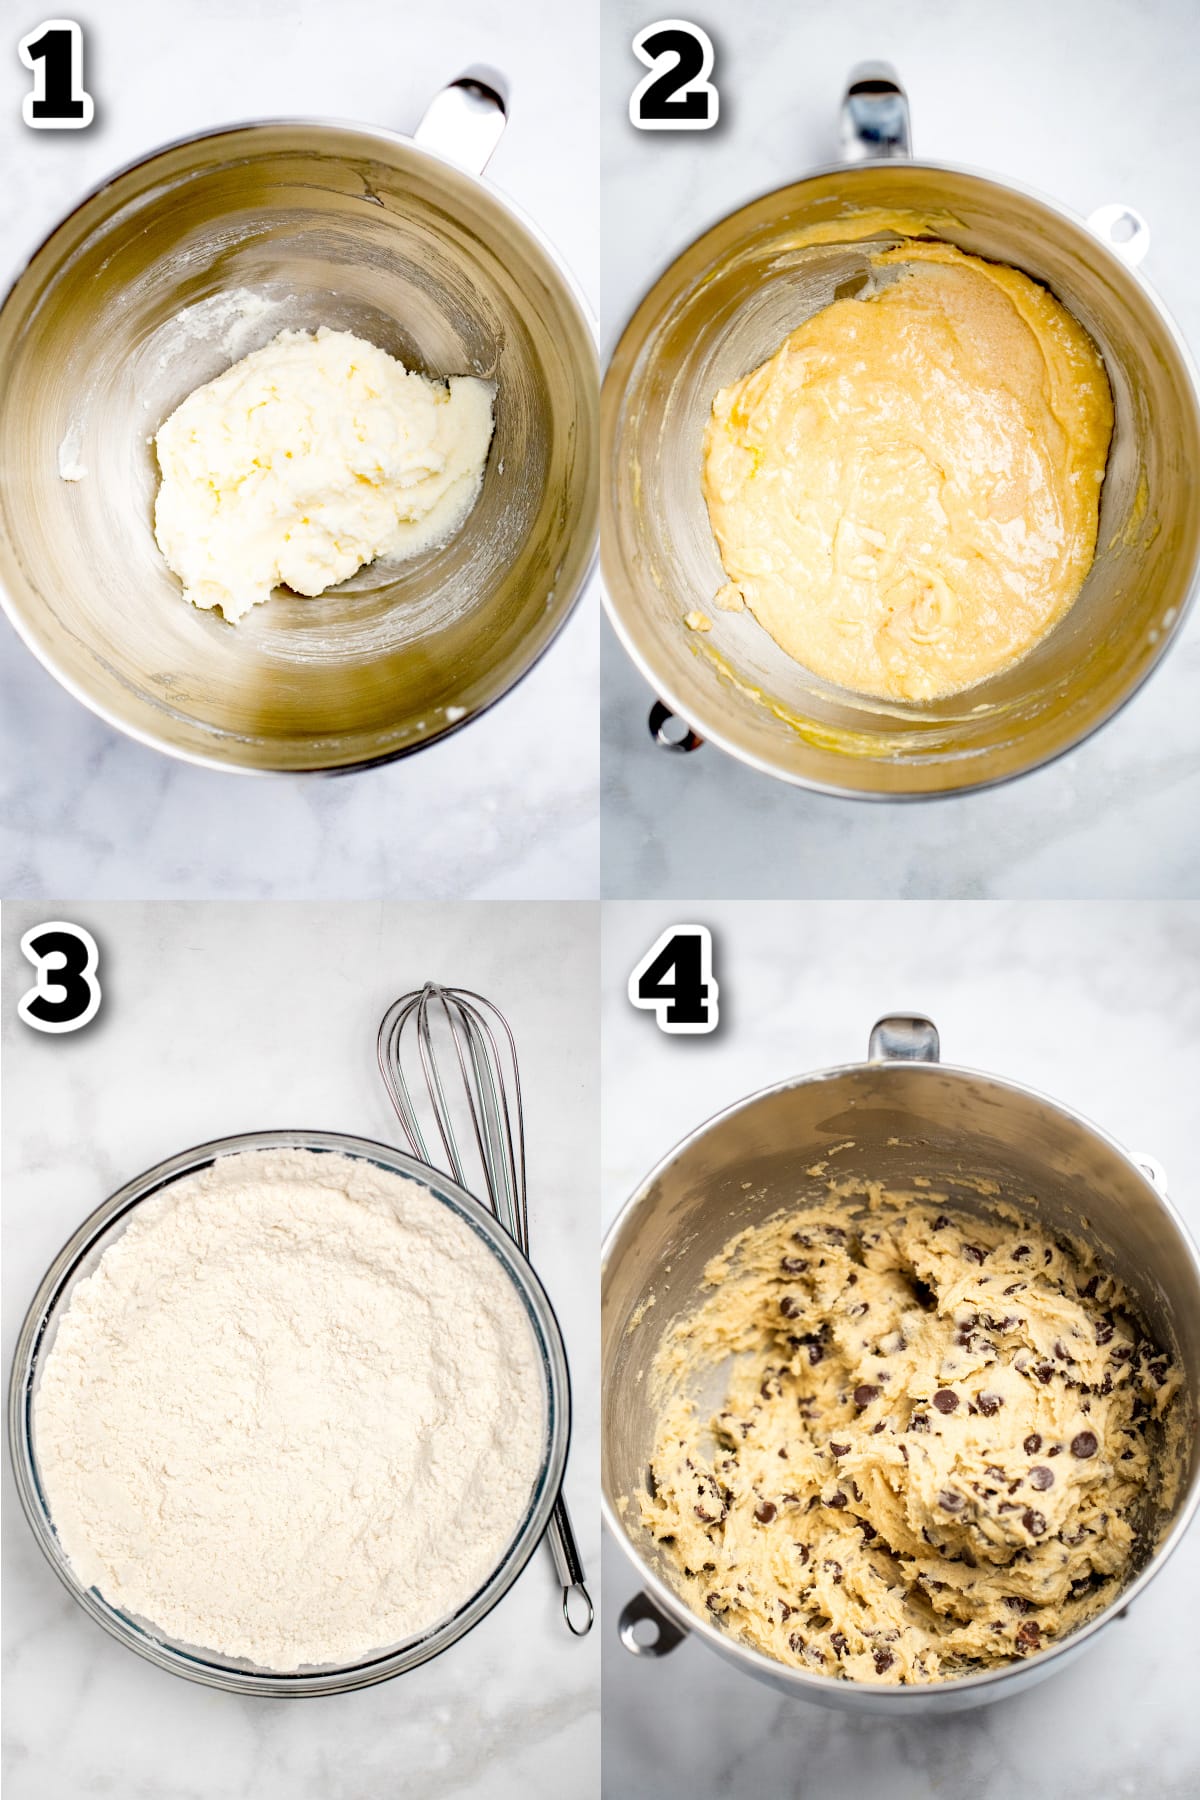 Step by step photos for how to make gluten free chocolate chip cookies.